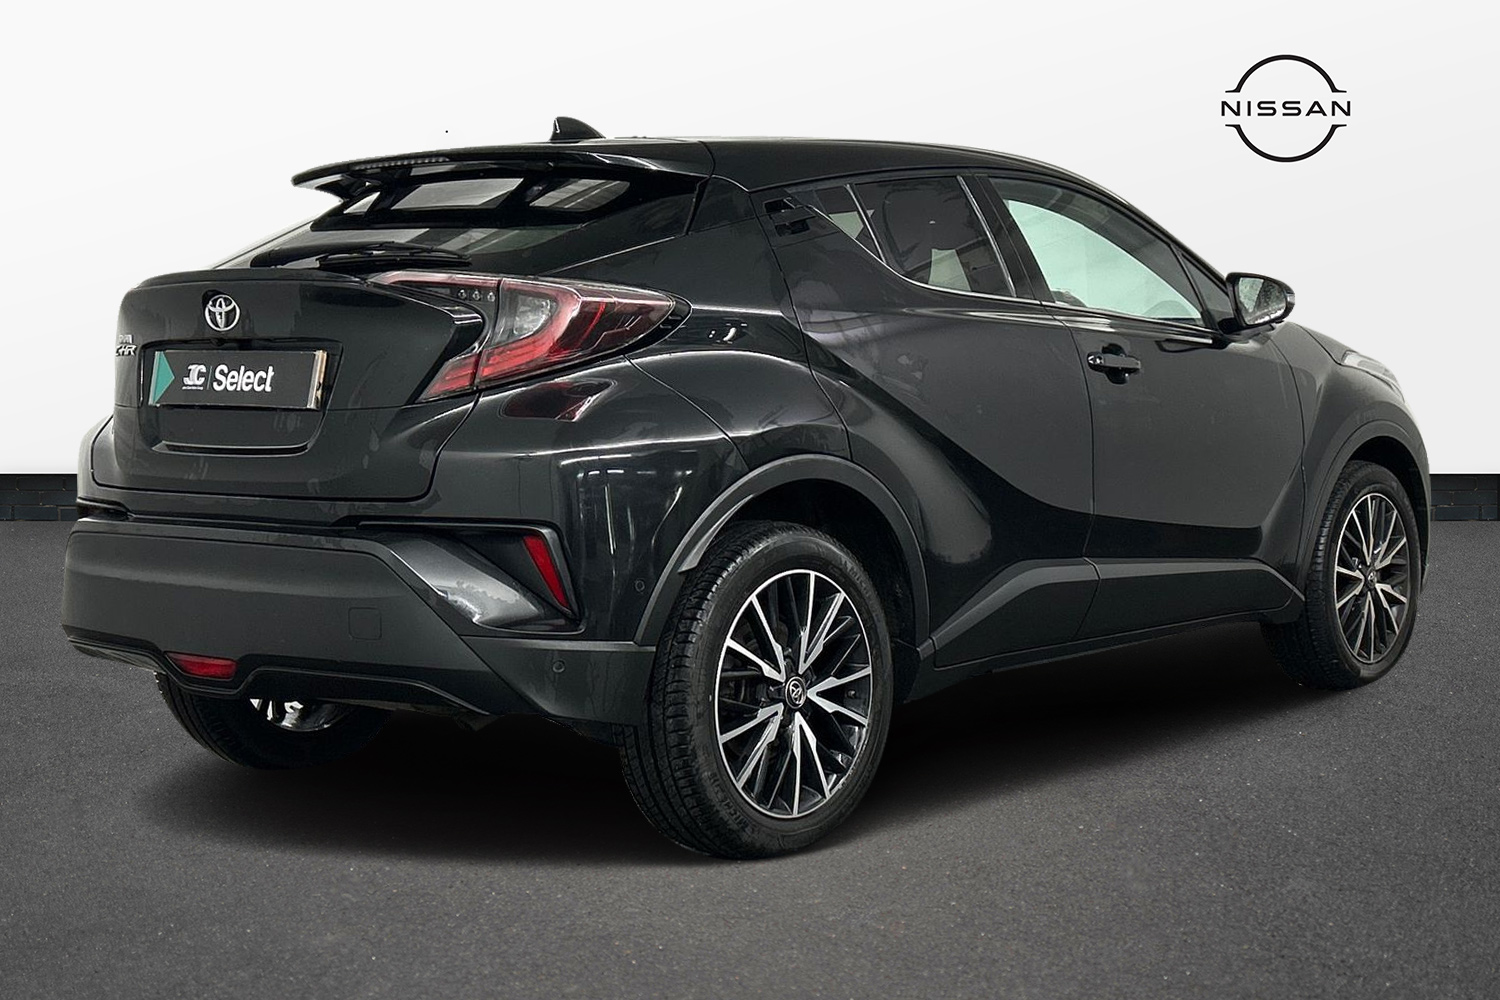 Toyota C-HR 1.2T Excel 5dr [Leather]